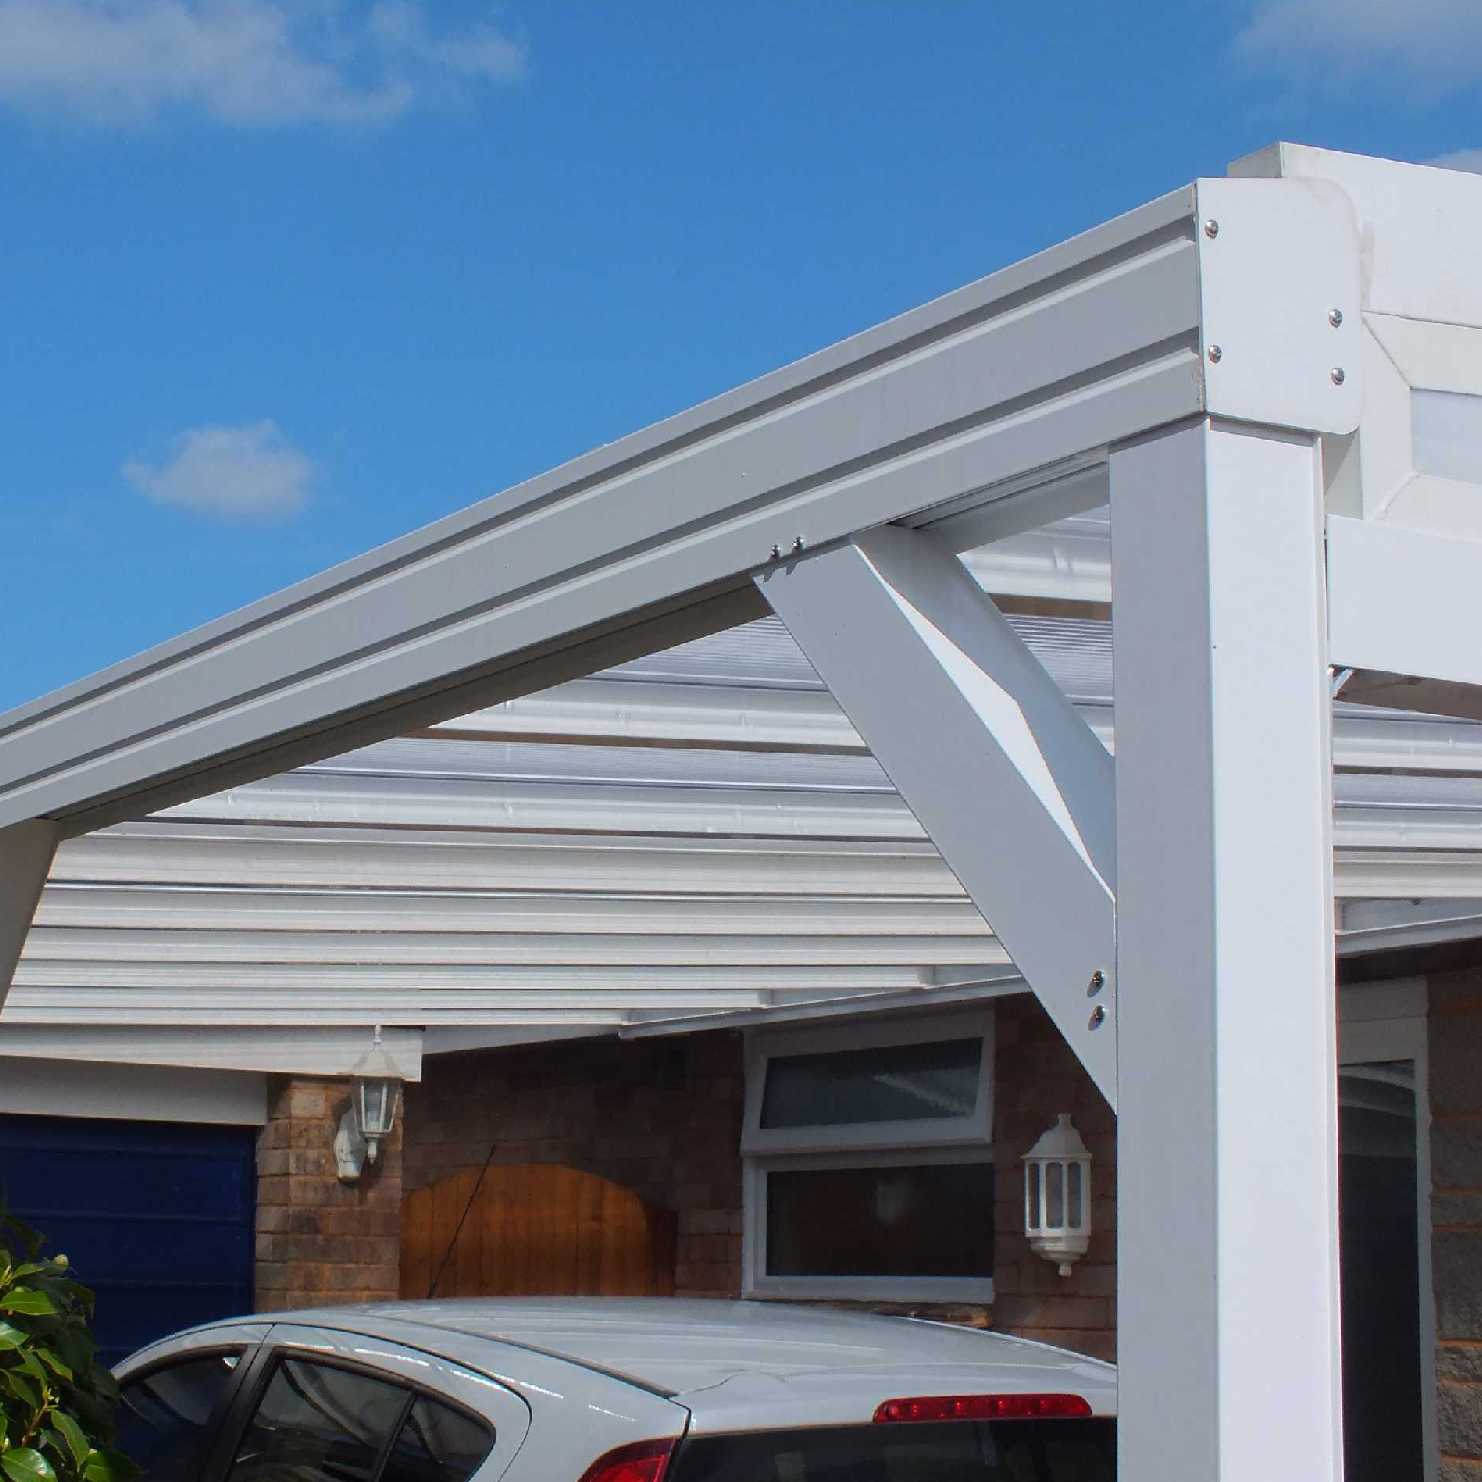 Great deals on Omega Smart Lean-To Canopy, White with 16mm Polycarbonate Glazing - 9.6m (W) x 4.5m (P), (5) Supporting Posts